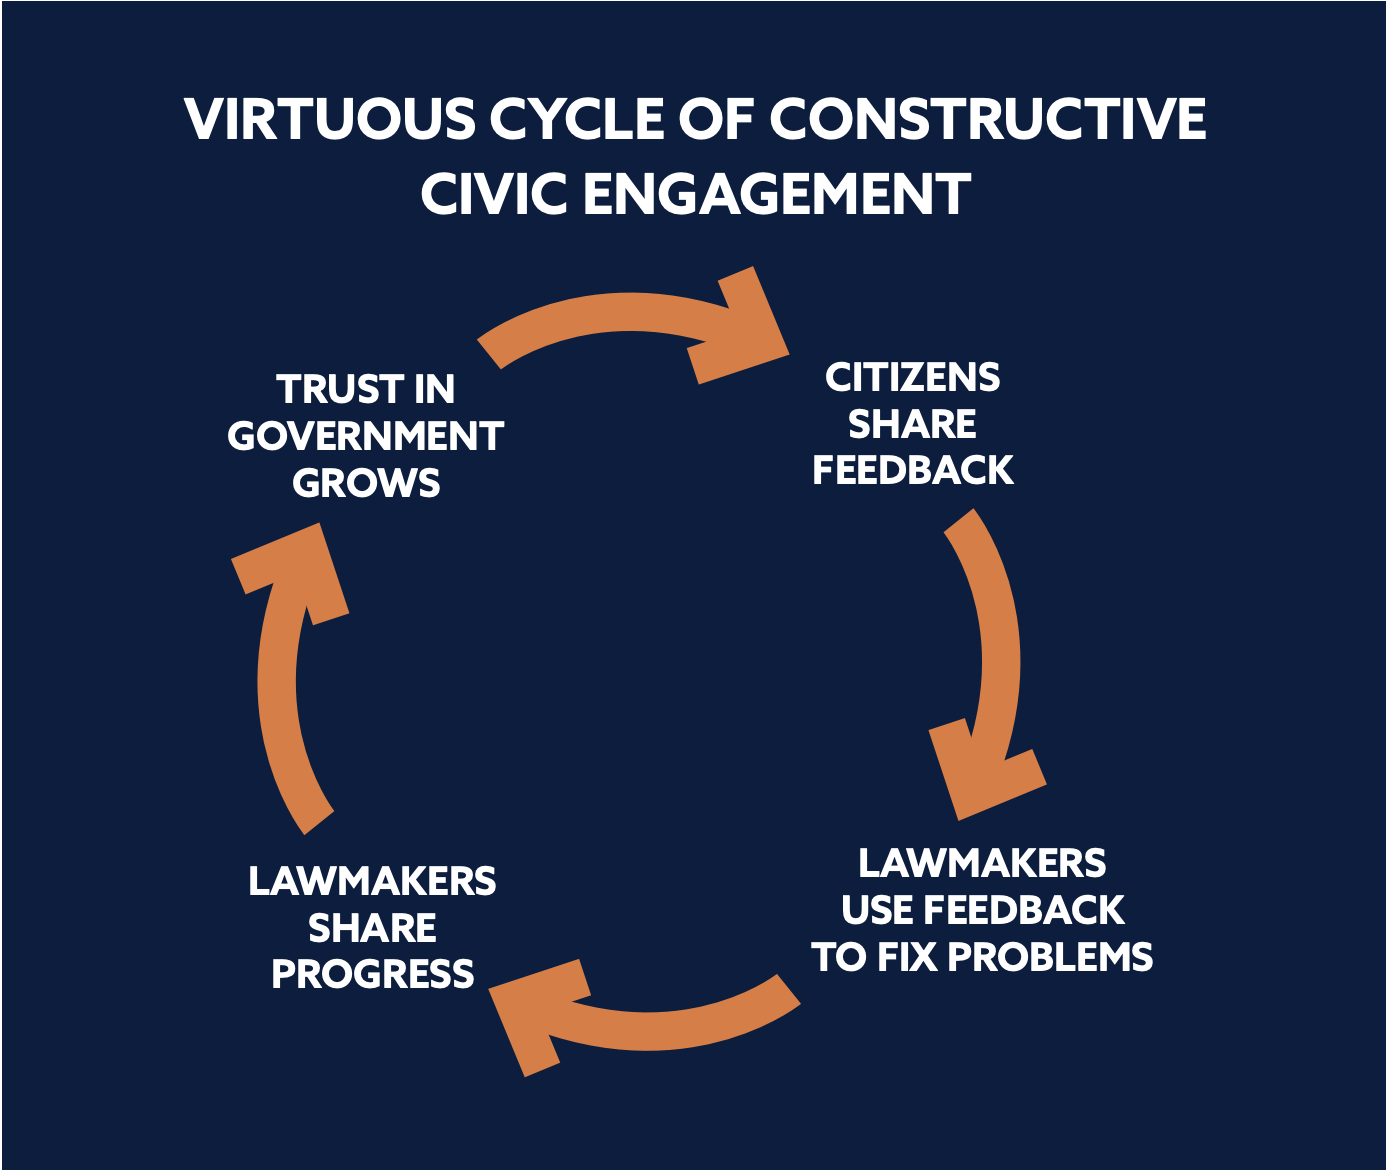 Virtuous Cycle of Constructive Civic Engagement: Trust in Government, Citizens Share Feedback, Lawmakers Use Feedback to Fix Problems, Lawmakers Share Progress 